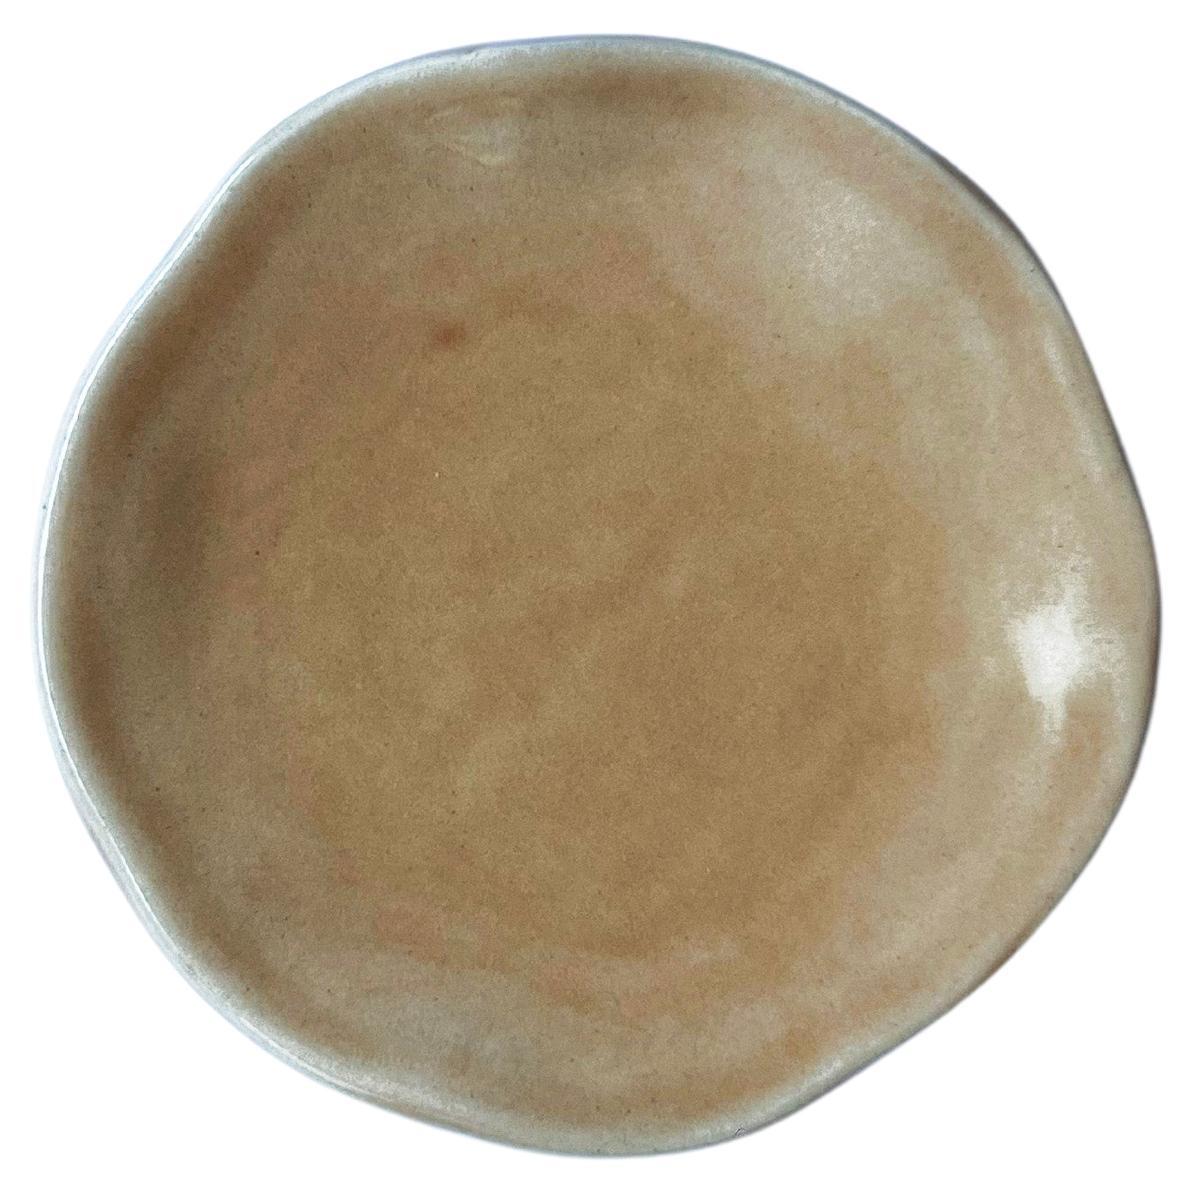 This exquisite ceramic saucer for coffee or tea cup by Amica is a beautiful example of the craftsmanship of Mexican artisans from Tlaquepaque, Jalisco. Each saucer has been carefully handcrafted using traditional techniques that have been passed